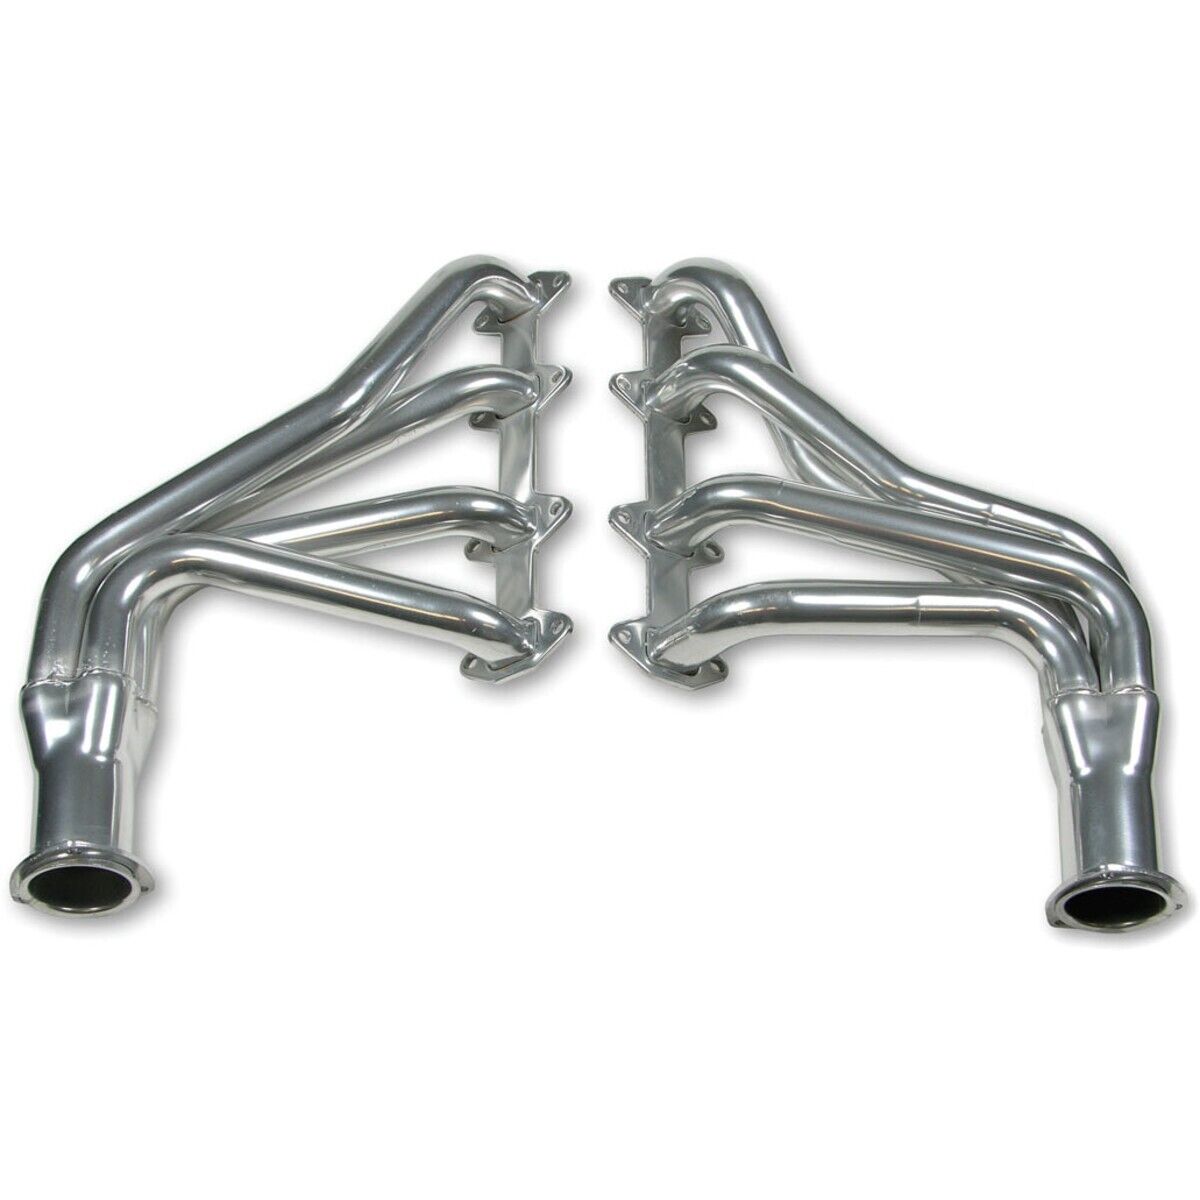 32540FLT Flowtech Headers Set of 2 for Truck F150 F250 F350 Ford F-150 Pair